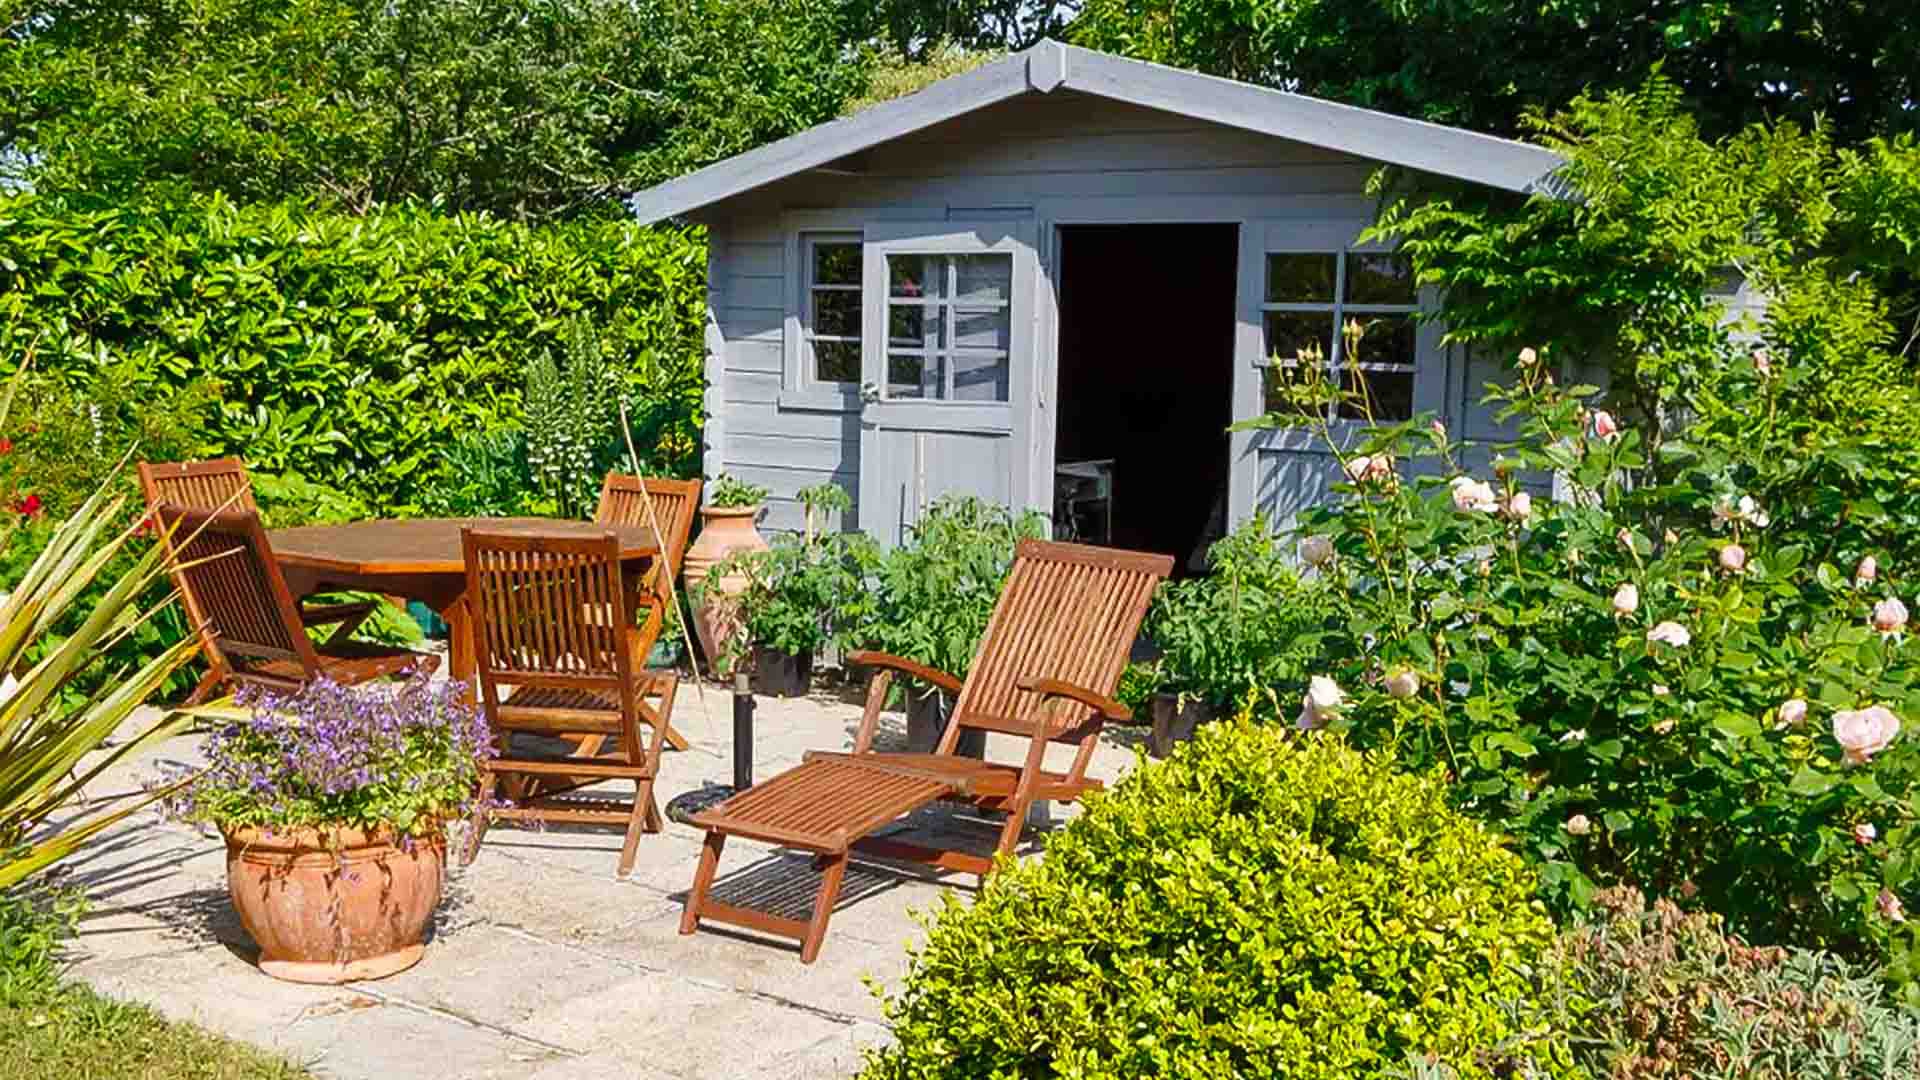 Sun Rise Sheds | The Best Ways to Make Your Storage Shed into a Beautiful Potting Shed